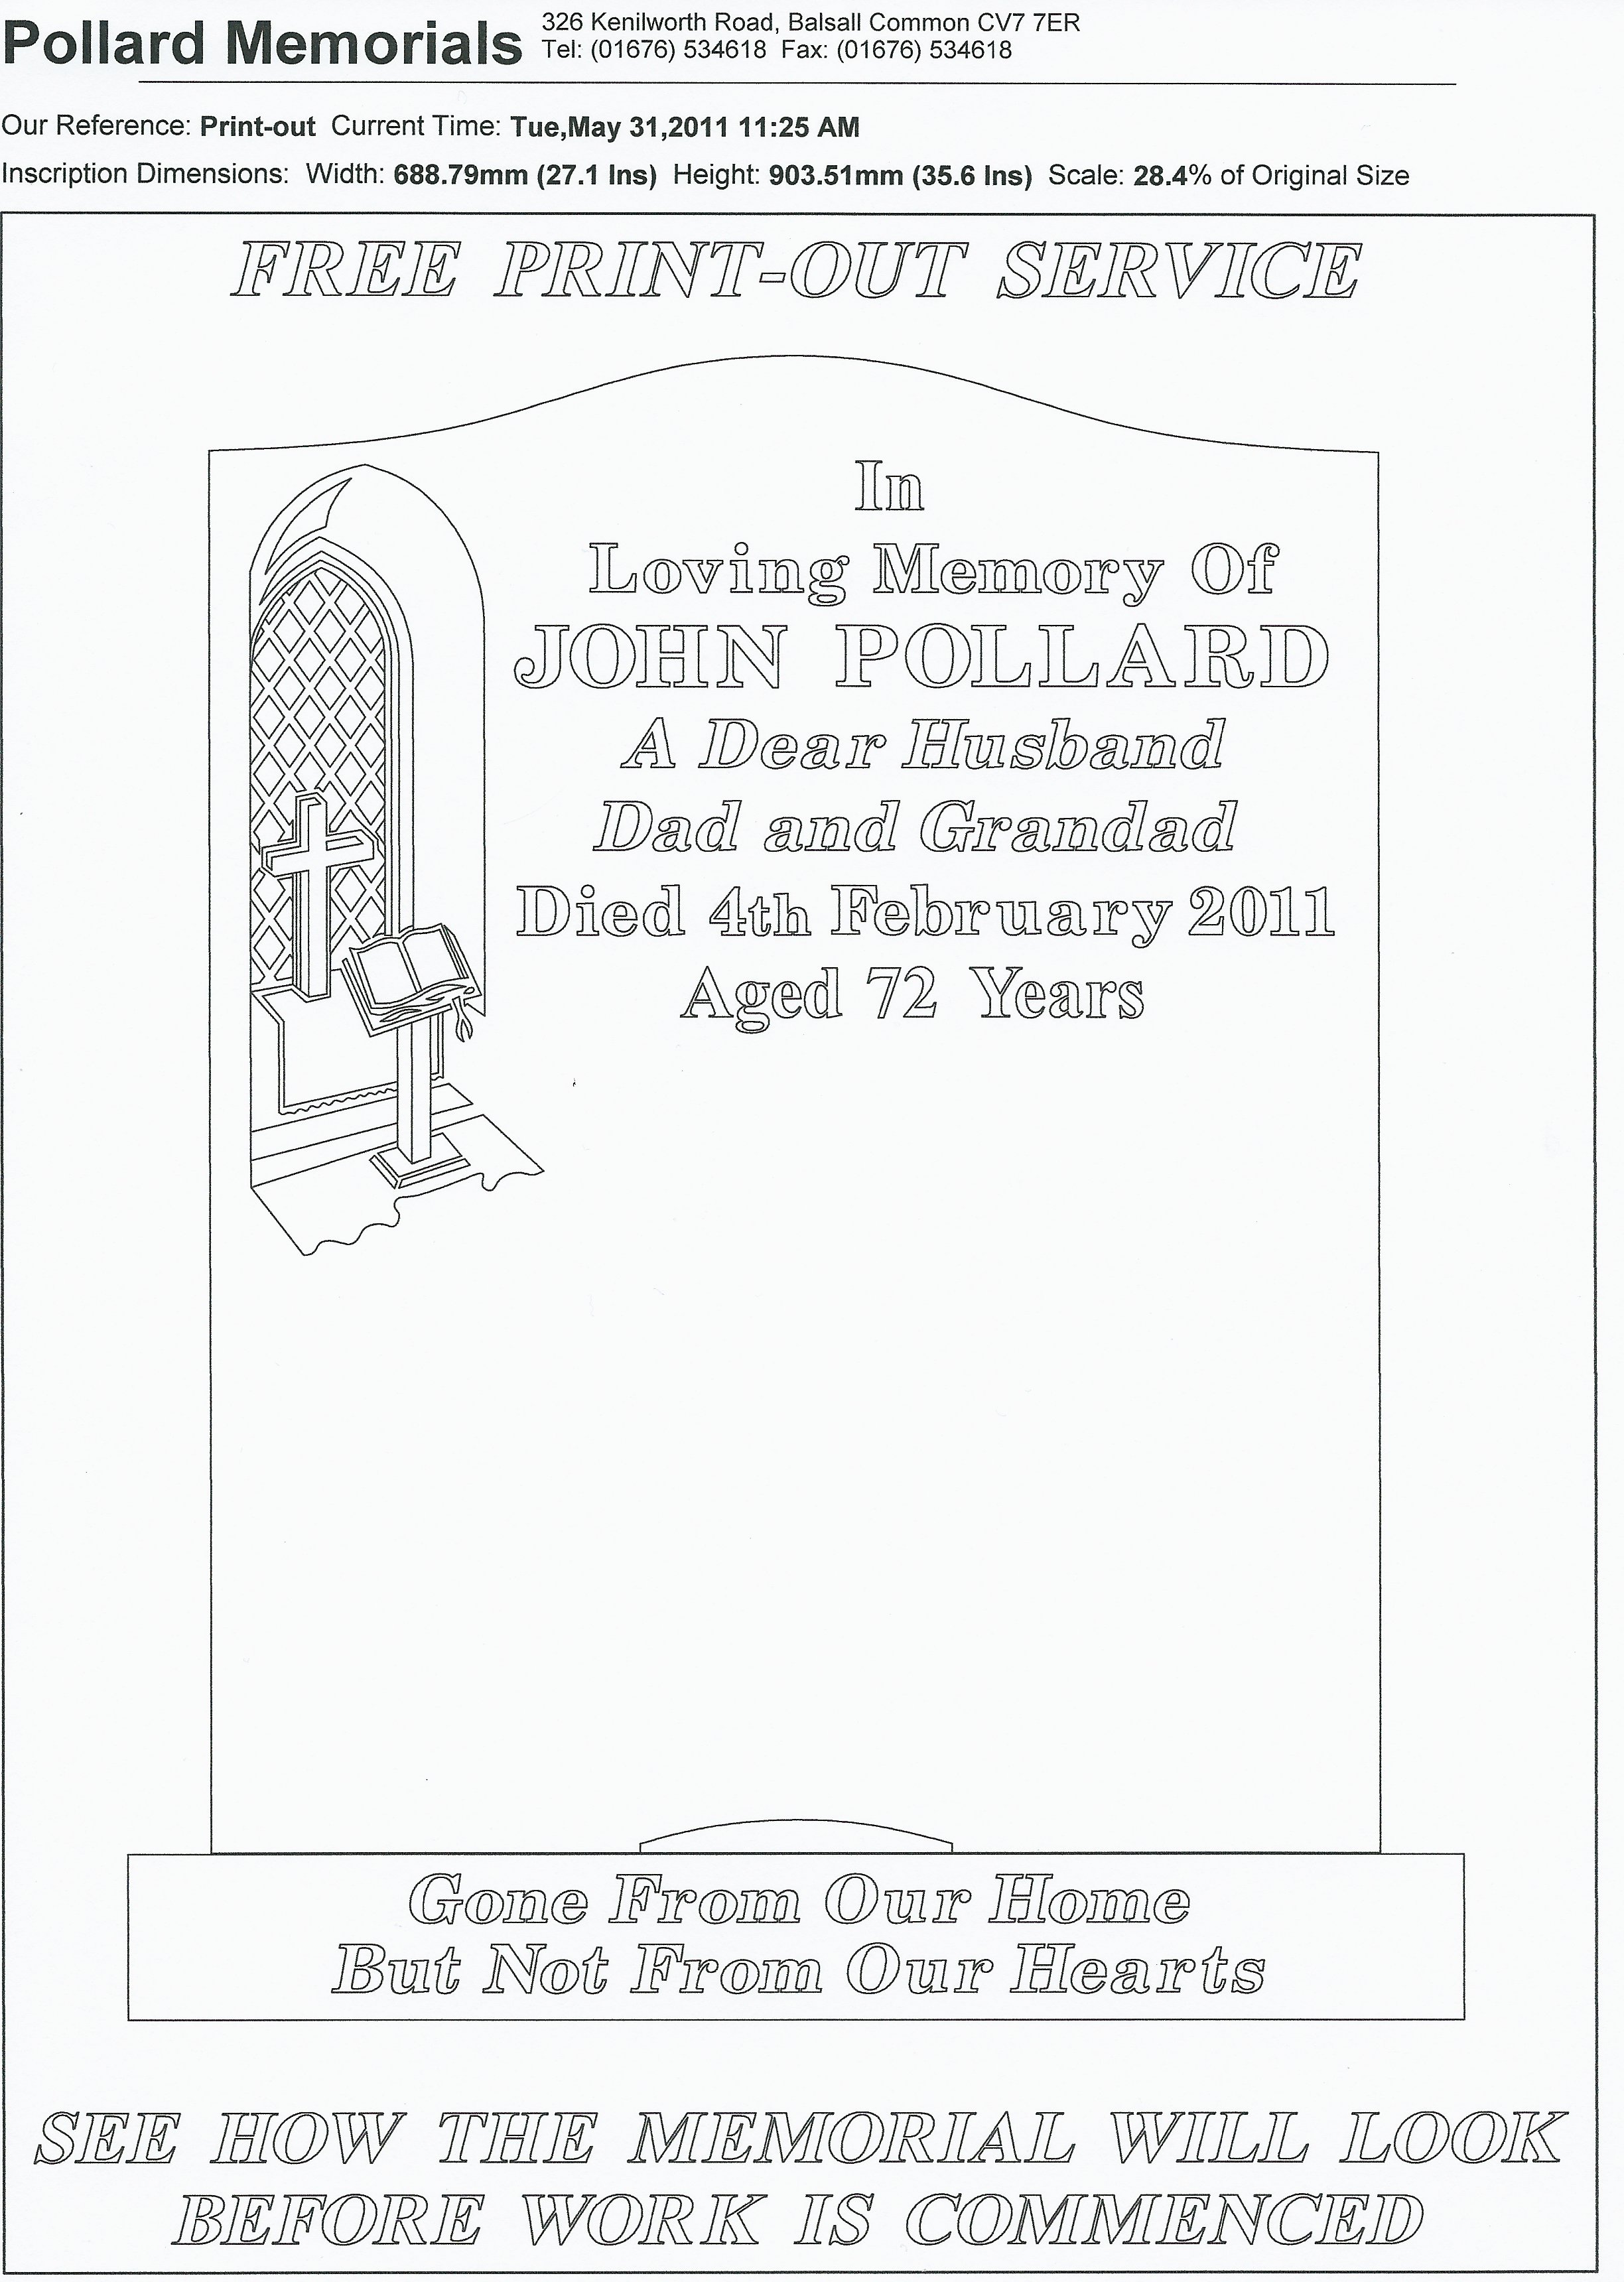 Headstone Print out Example